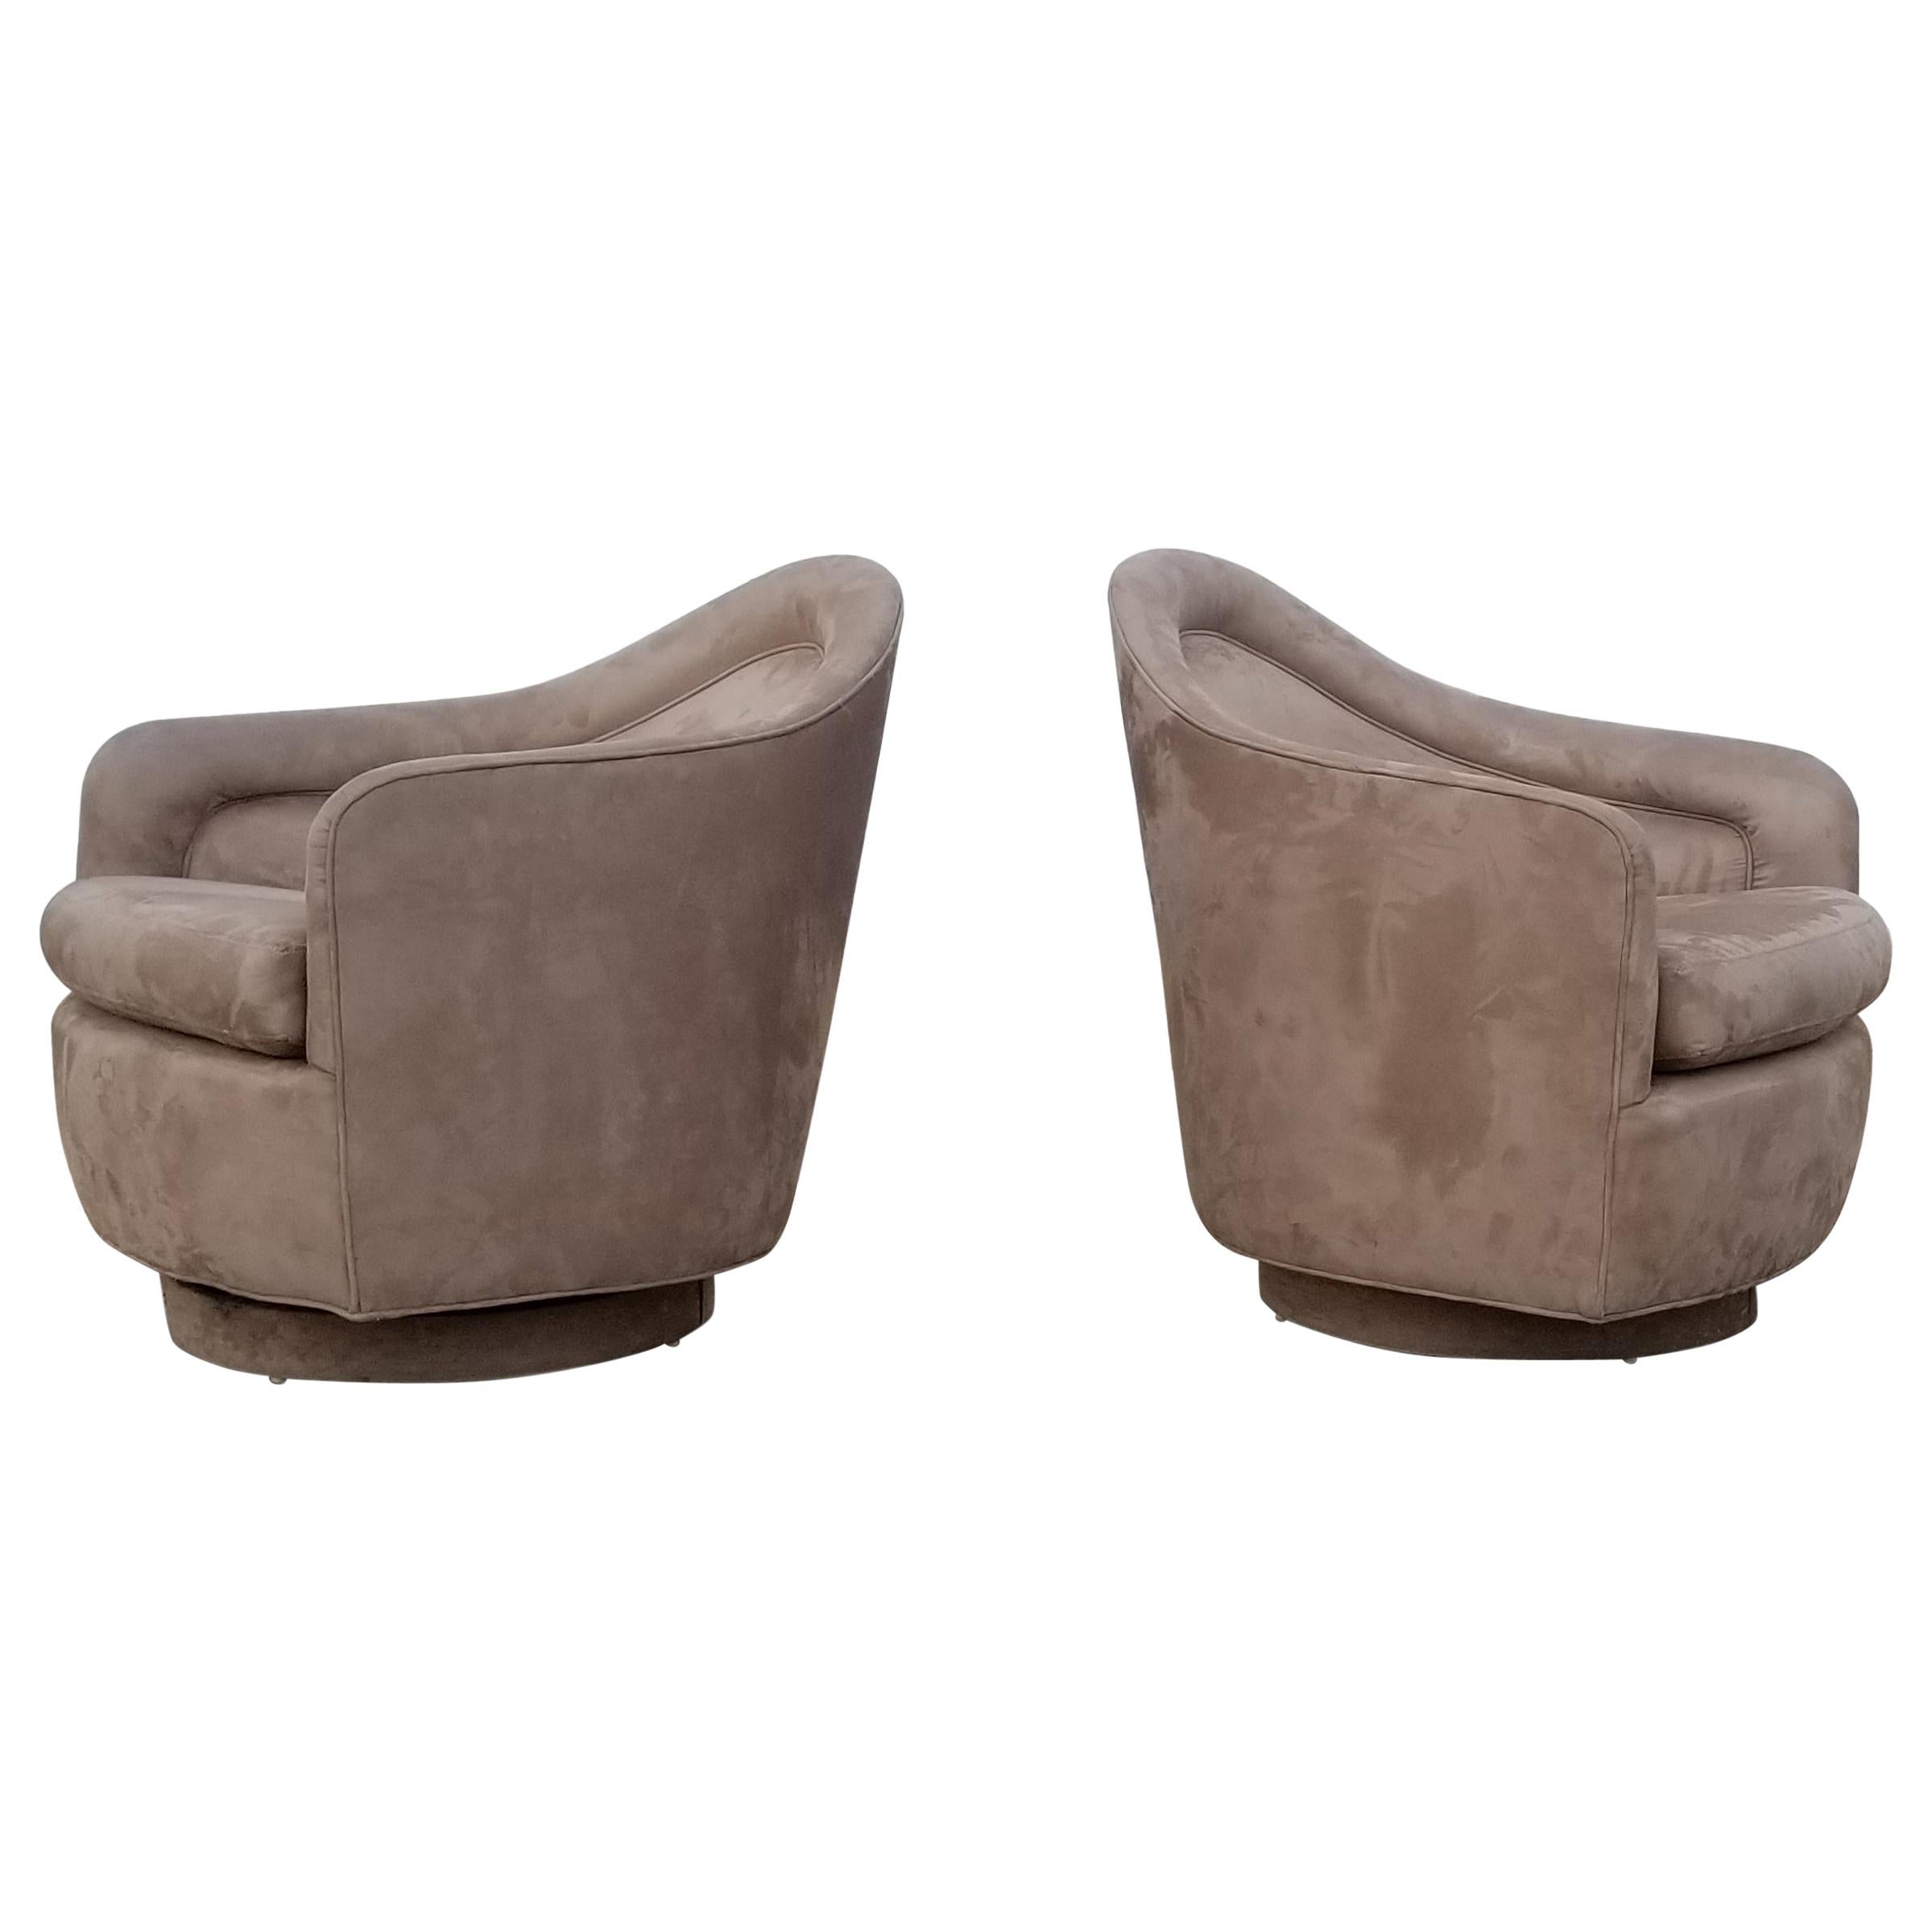 Pair of Rocking Swivel Lounge Chairs by Milo Baughman